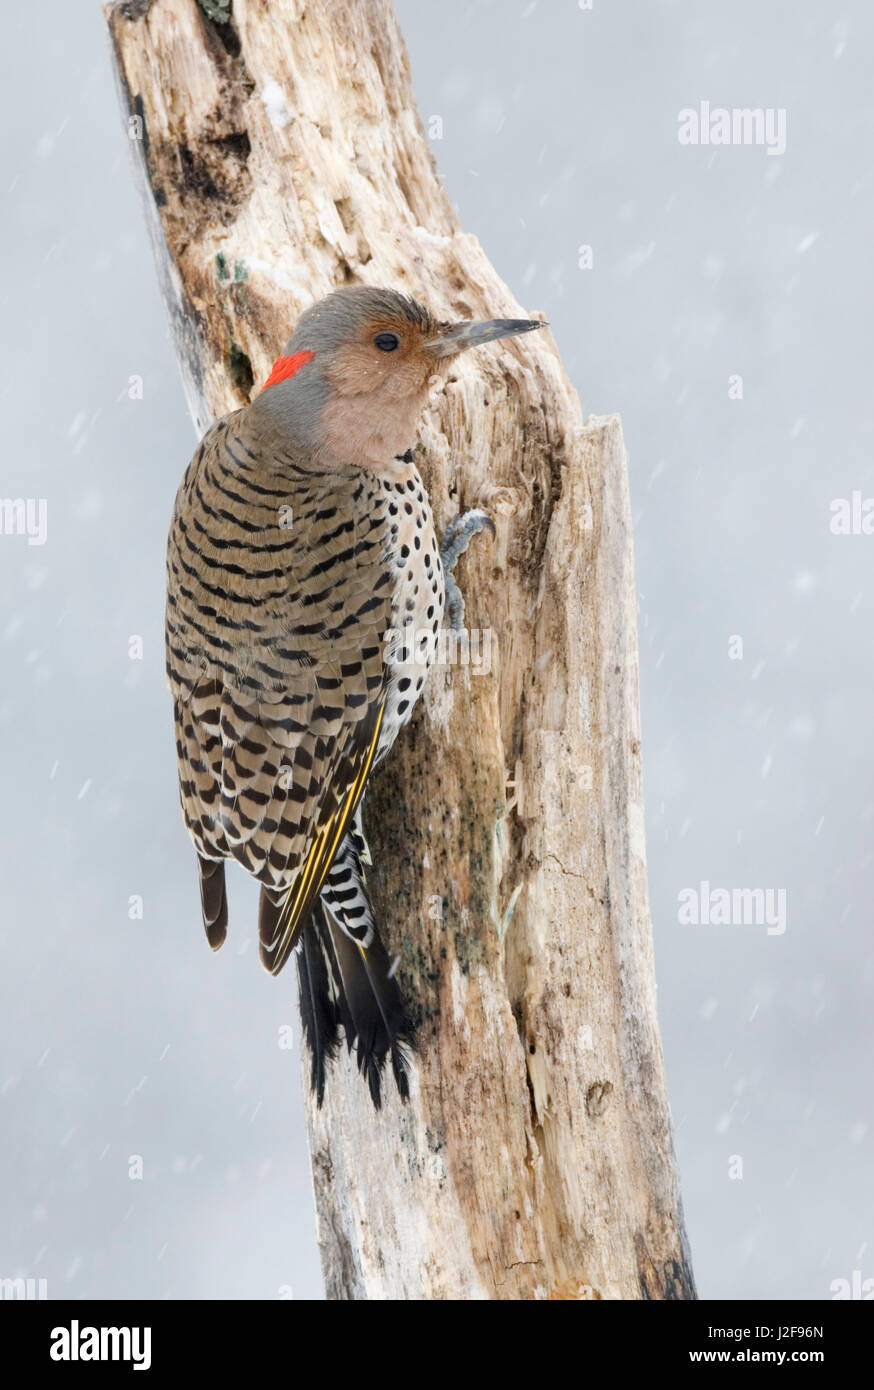 An female Northern Flicker (Colaptes auratus) hanging on a tree trunk Stock Photo